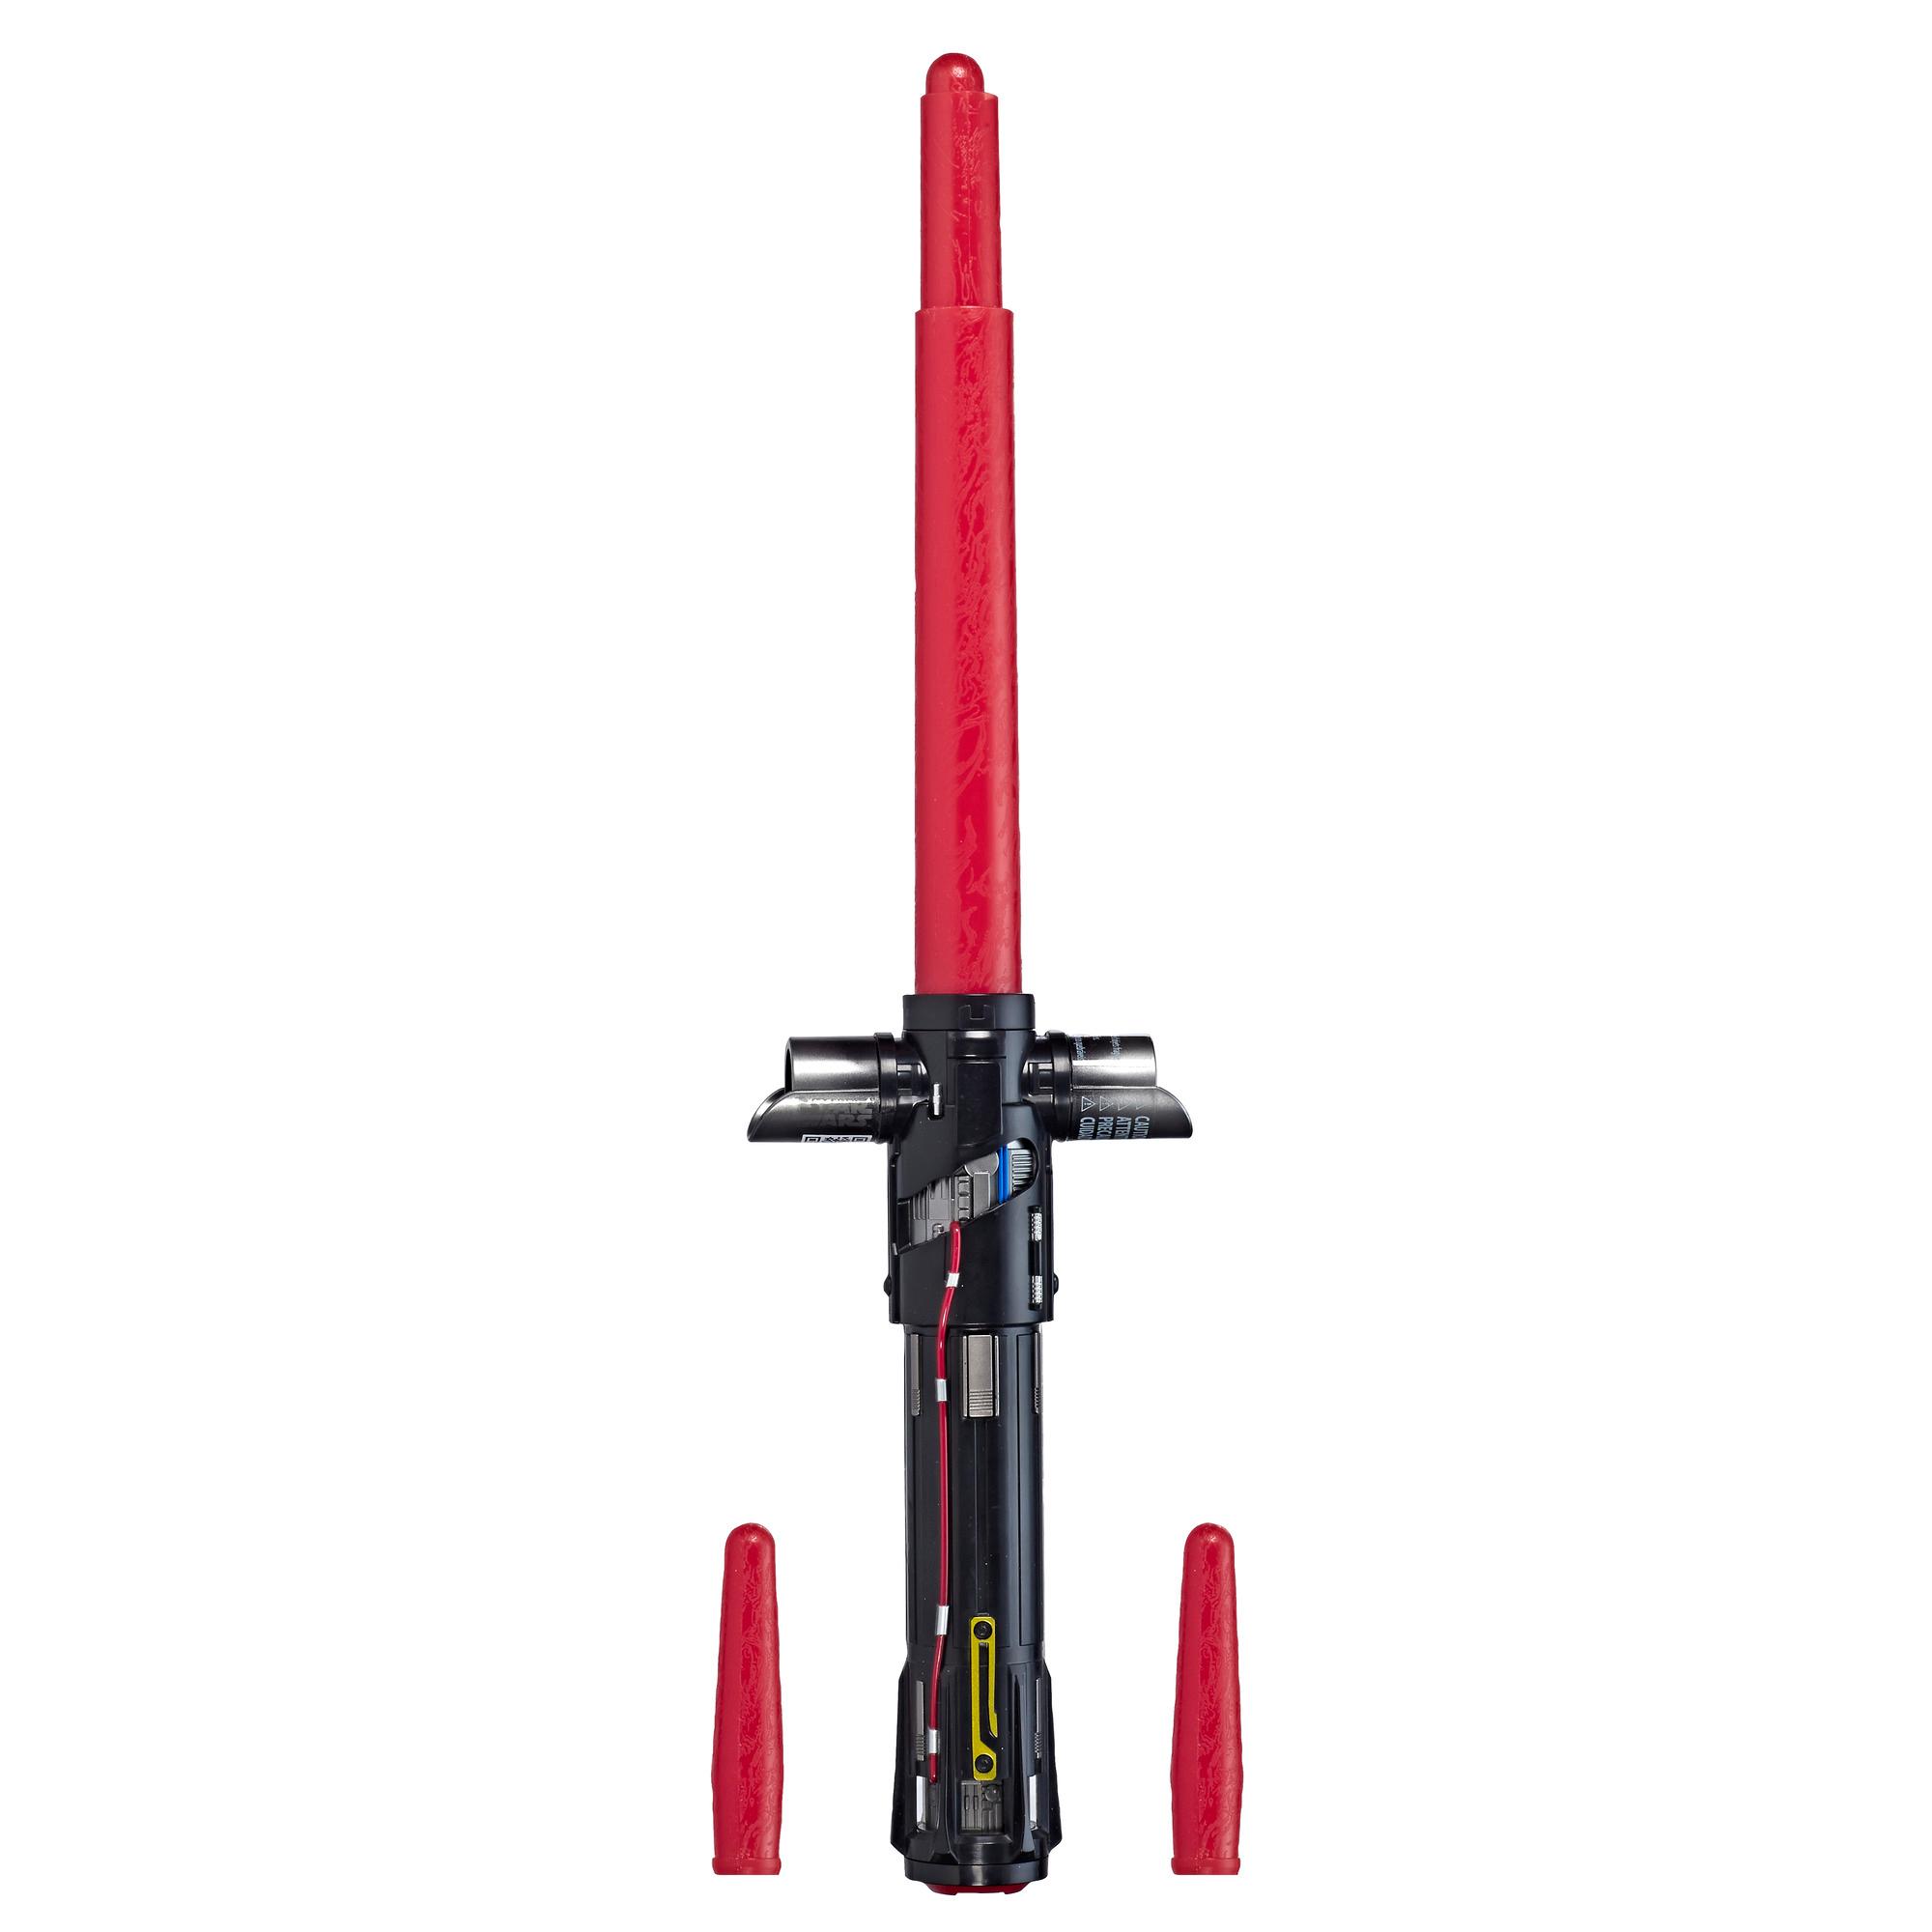 Star Wars Kylo Ren Electronic Red Lightsaber Toy